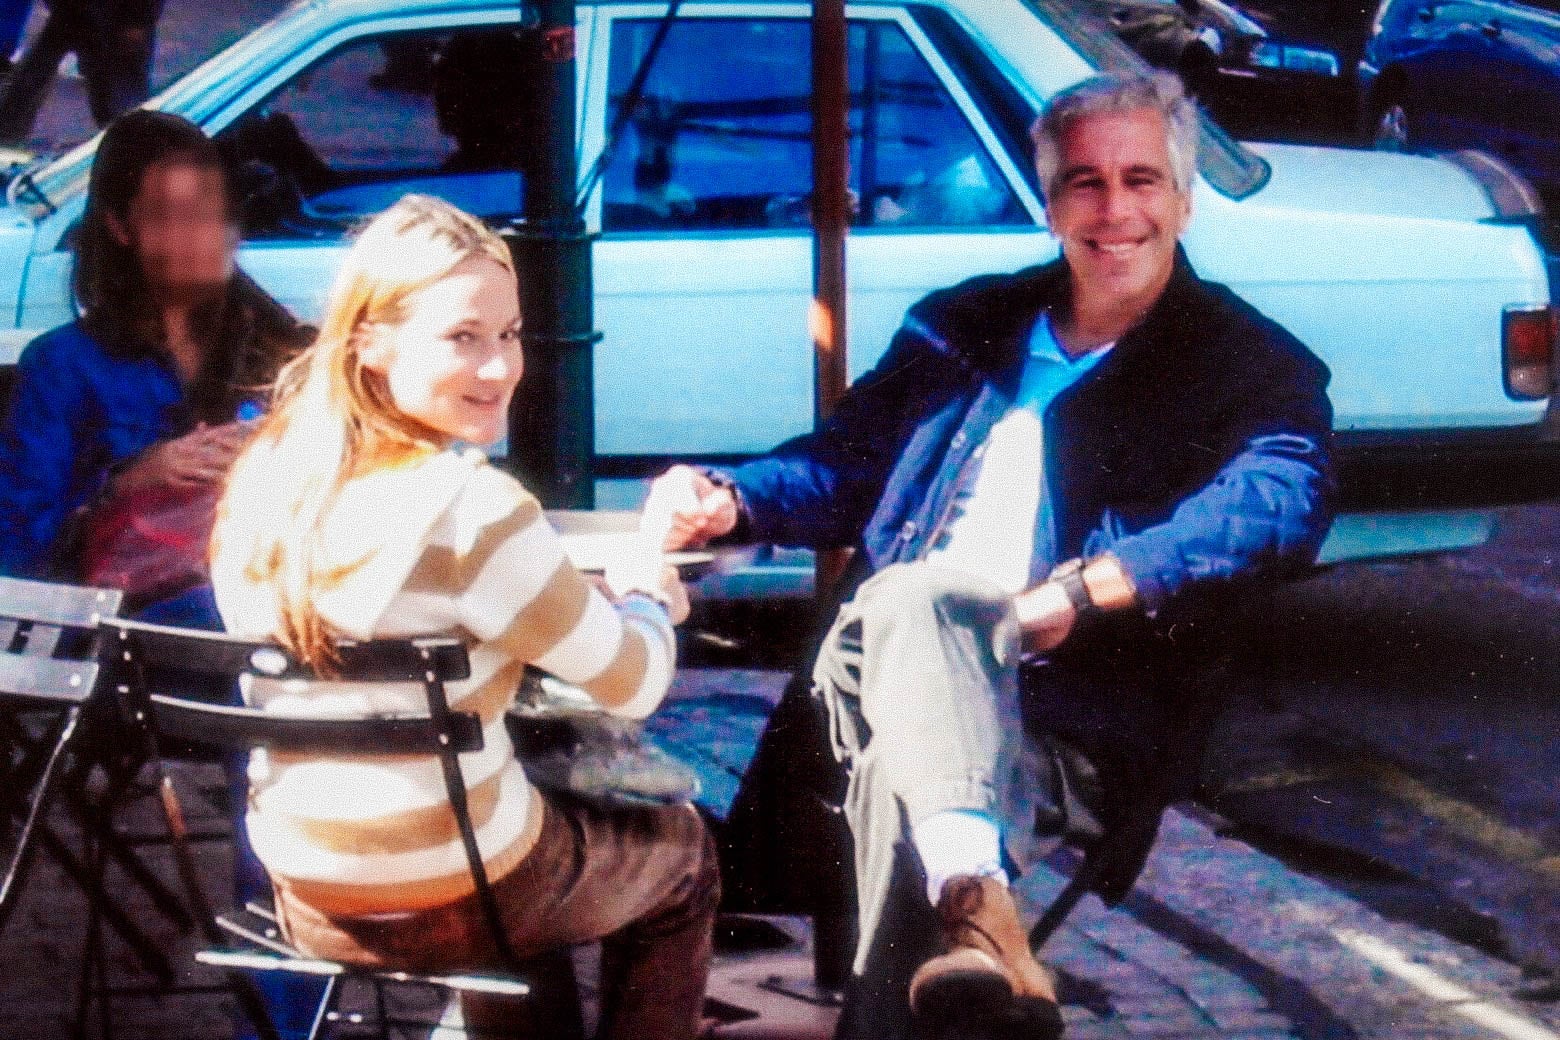 Jeffrey Epstein, smiling, seated with Chauntae Davies at an outdoor bistro table.